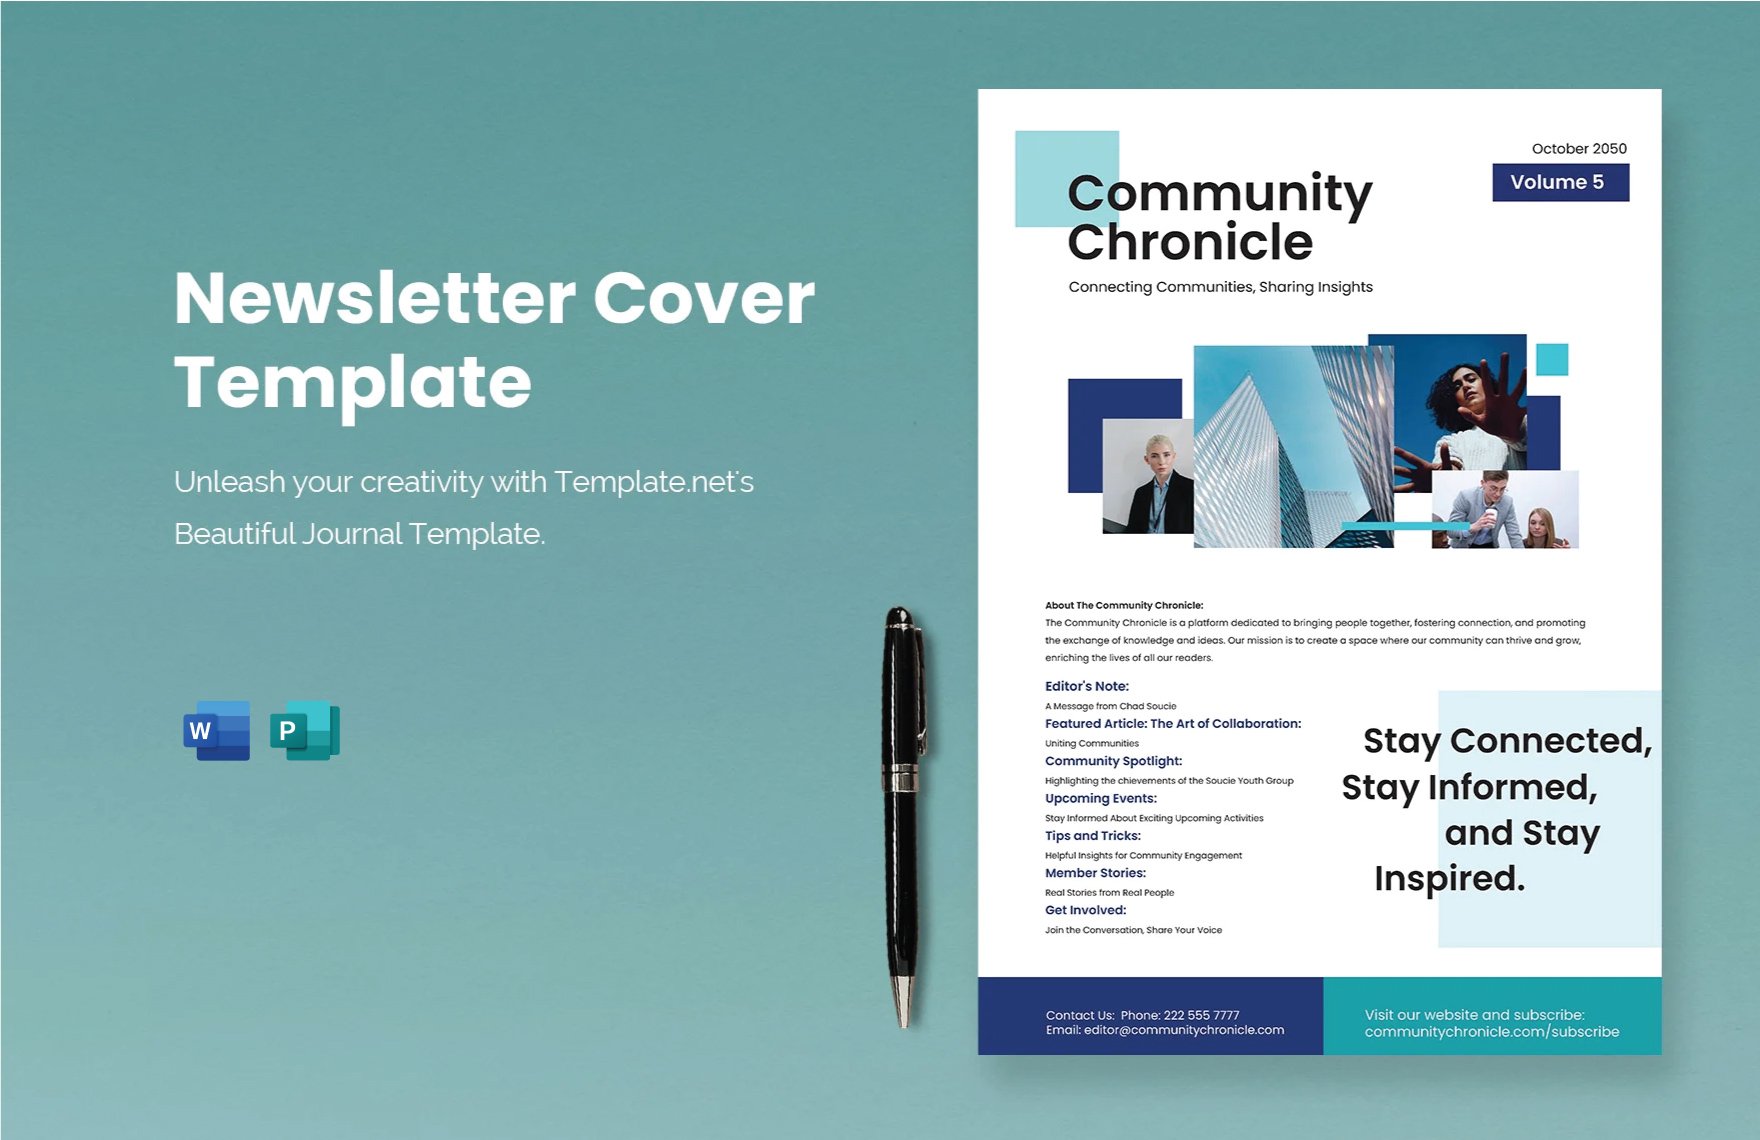 Newsletter Cover Template in Word, Publisher